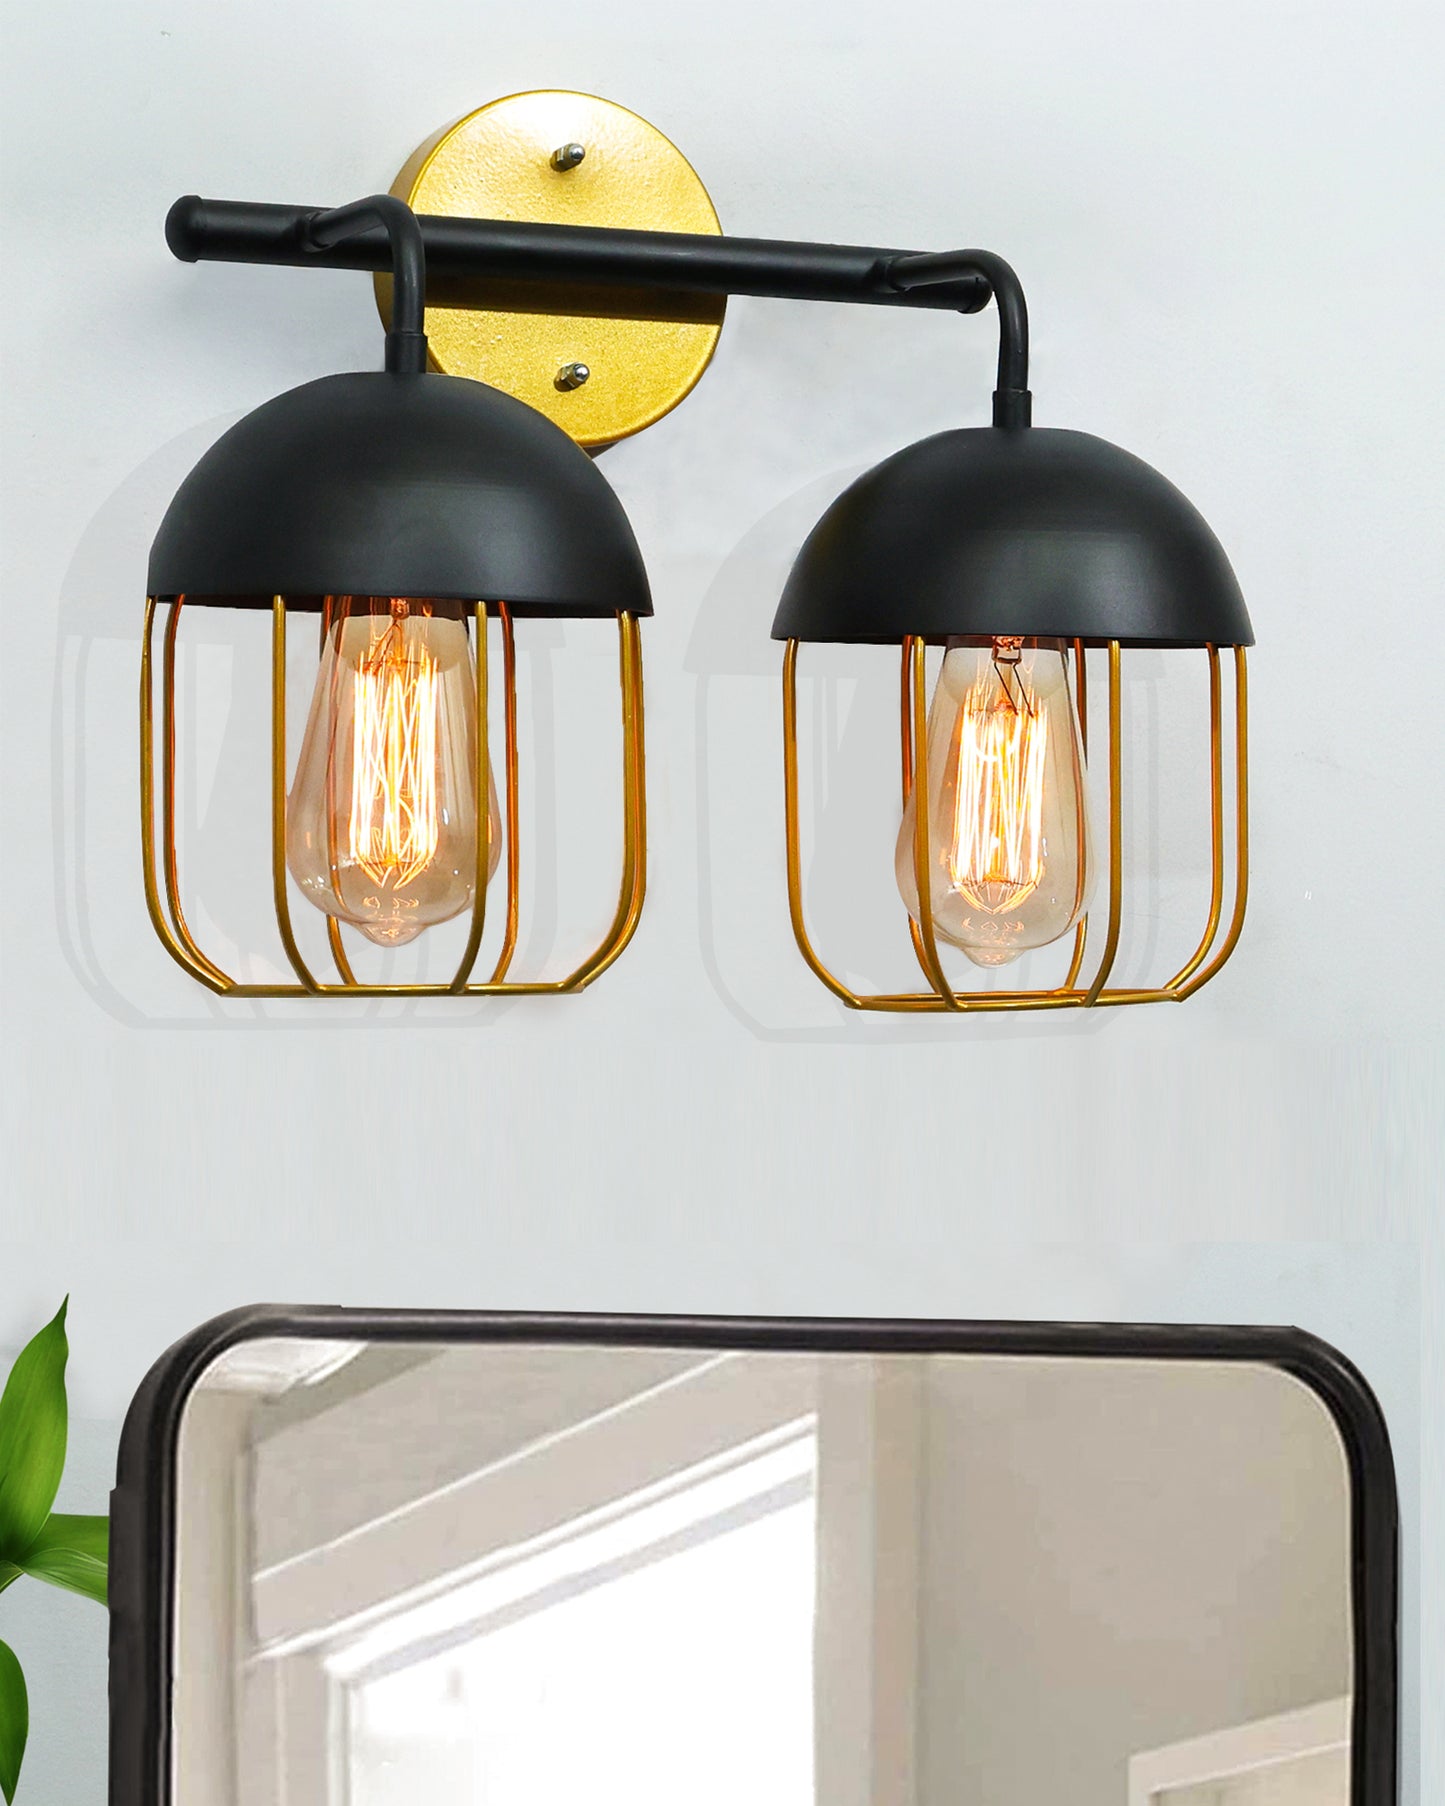 Cage Wall Sconce,Modern Bathroom Wall Light Fixtures 2 Light Bathroom Vanity Light, Fixture for Bathroom Lights Over Mirror, Farmhouse Black and Gold